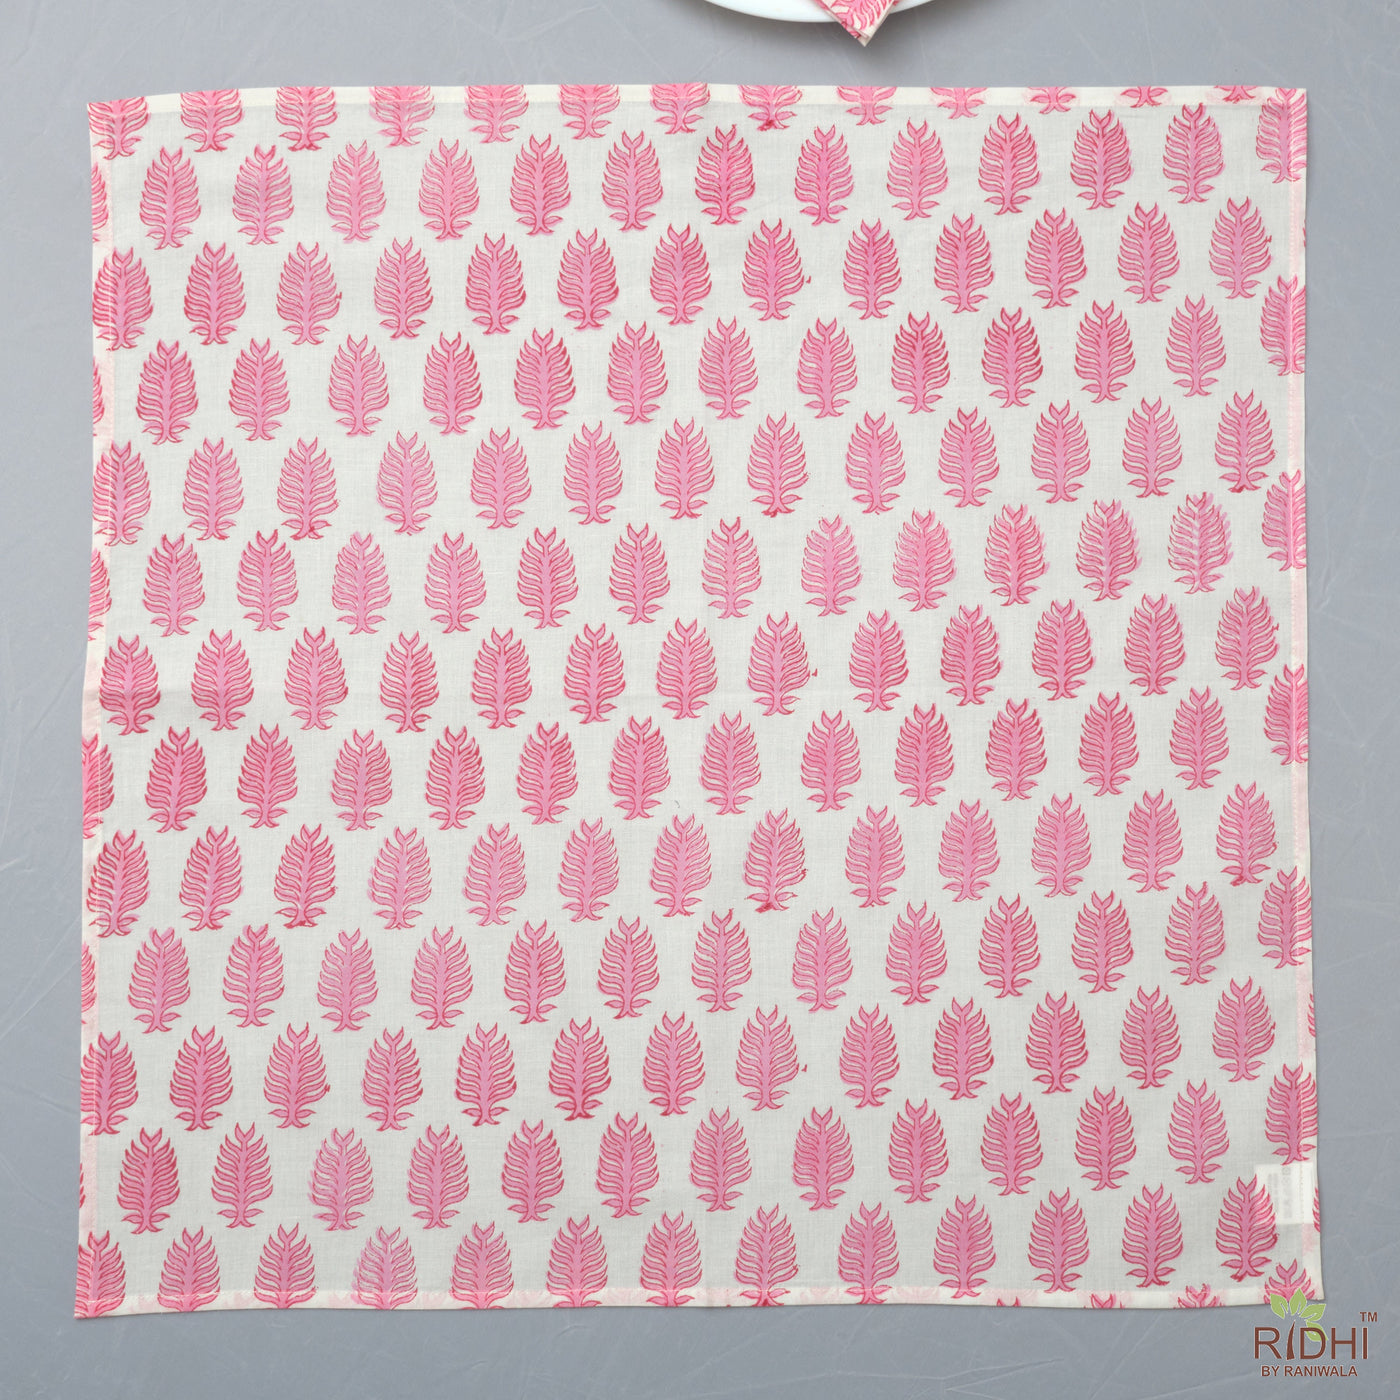 Fabricrush Taffy Pink and White Indian Hand Block Leaf Printed Pure Cotton Cloth Biodegradable Napkins, 18x18"- Cocktail Napkins, 20x20"- Dinner Napkins